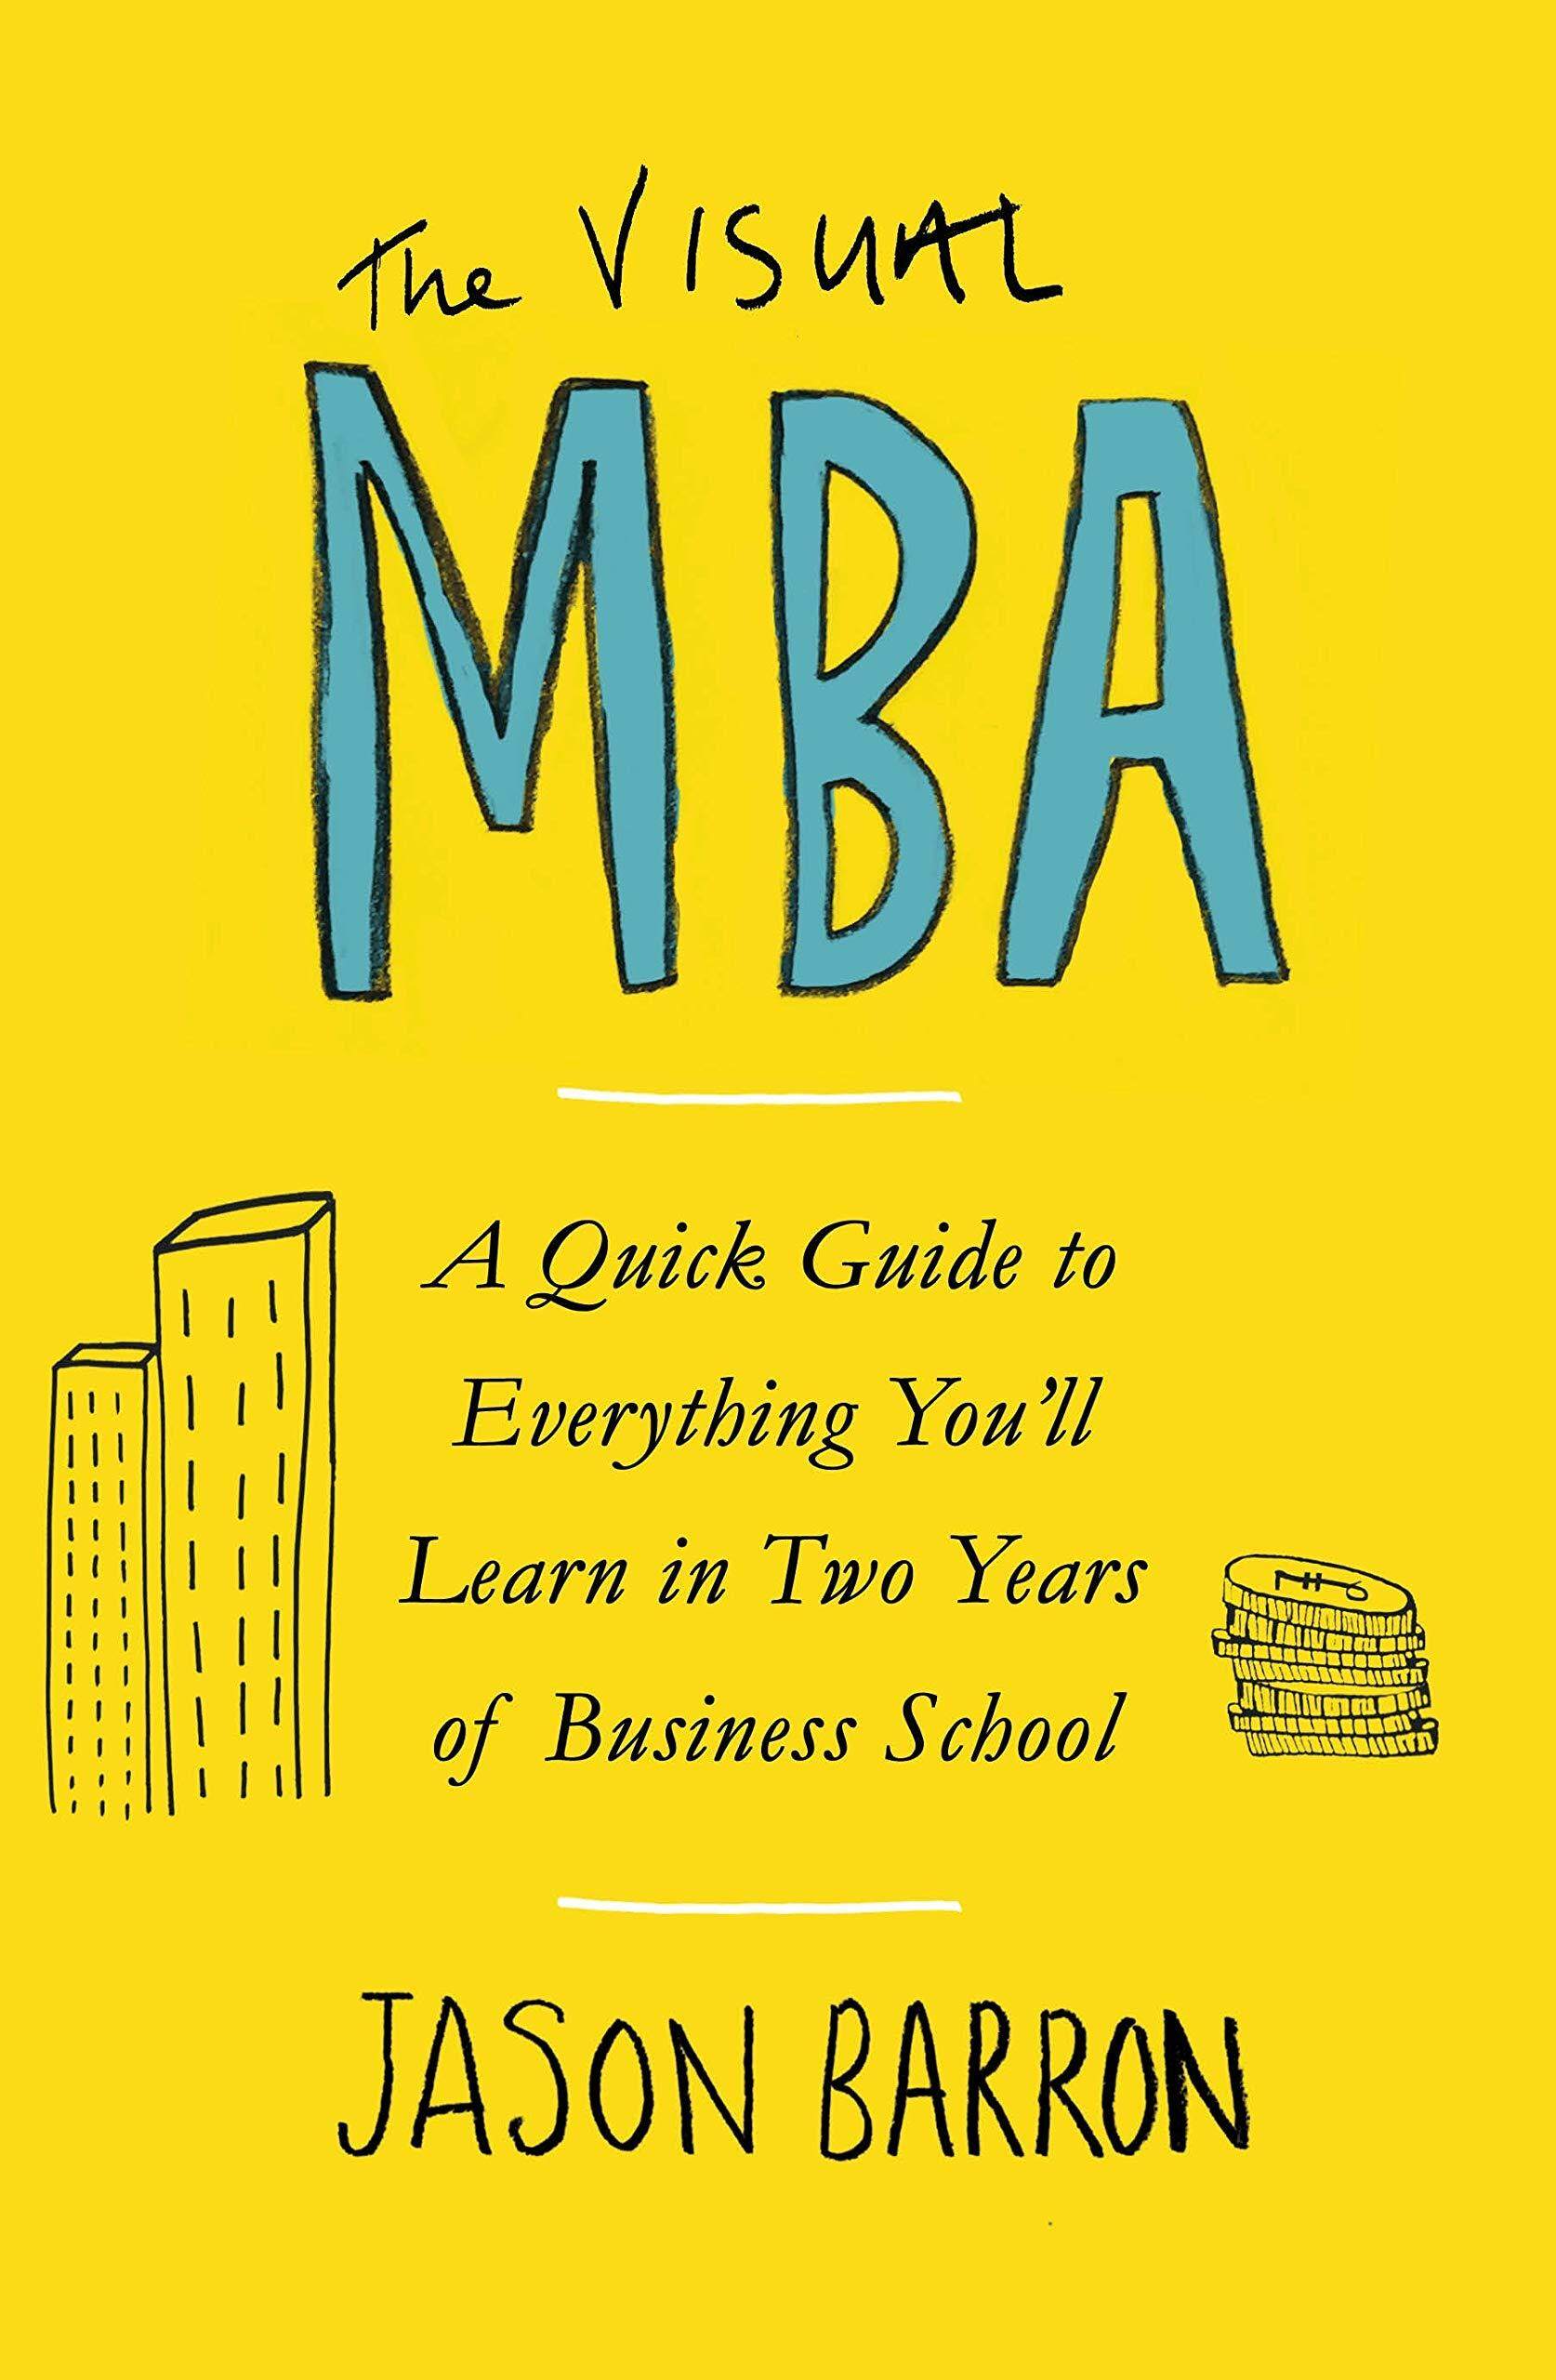 VISUAL MBA, THE: A QUICK GUIDE TO EVERYTHING YOU'LL LEARN IN TWO YEARS OF BUSINESS SCHOOL